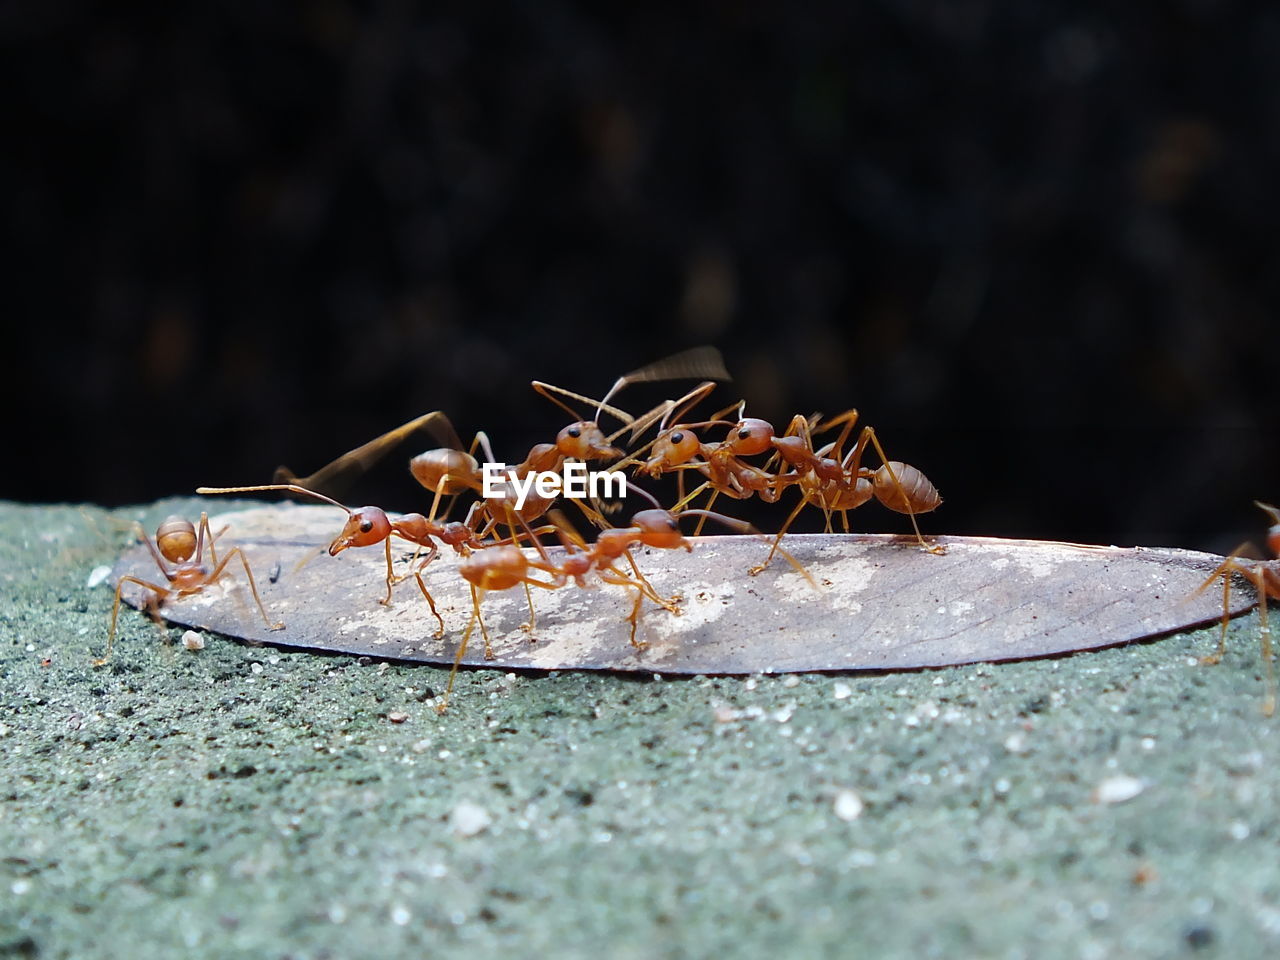 Several red ants are working together.